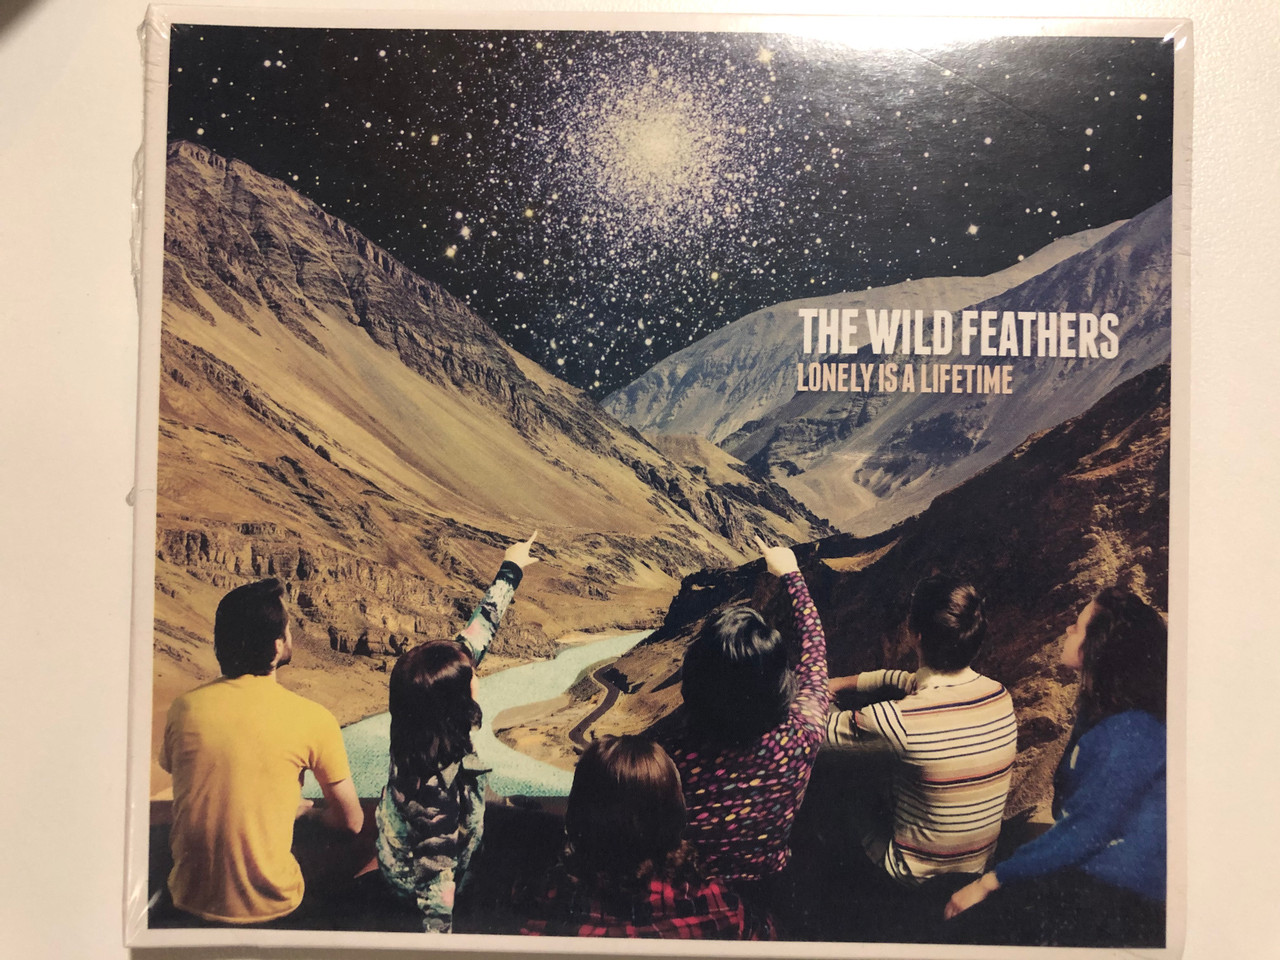 https://cdn10.bigcommerce.com/s-62bdpkt7pb/products/29828/images/177457/The_Wild_Feathers_Lonely_Is_A_Lifetime_Warner_Bros._Records_Audio_CD_2016_9362-49223-7_1__91817.1620212441.1280.1280.JPG?c=2&_ga=2.217927889.613799009.1620501054-800322906.1620501054